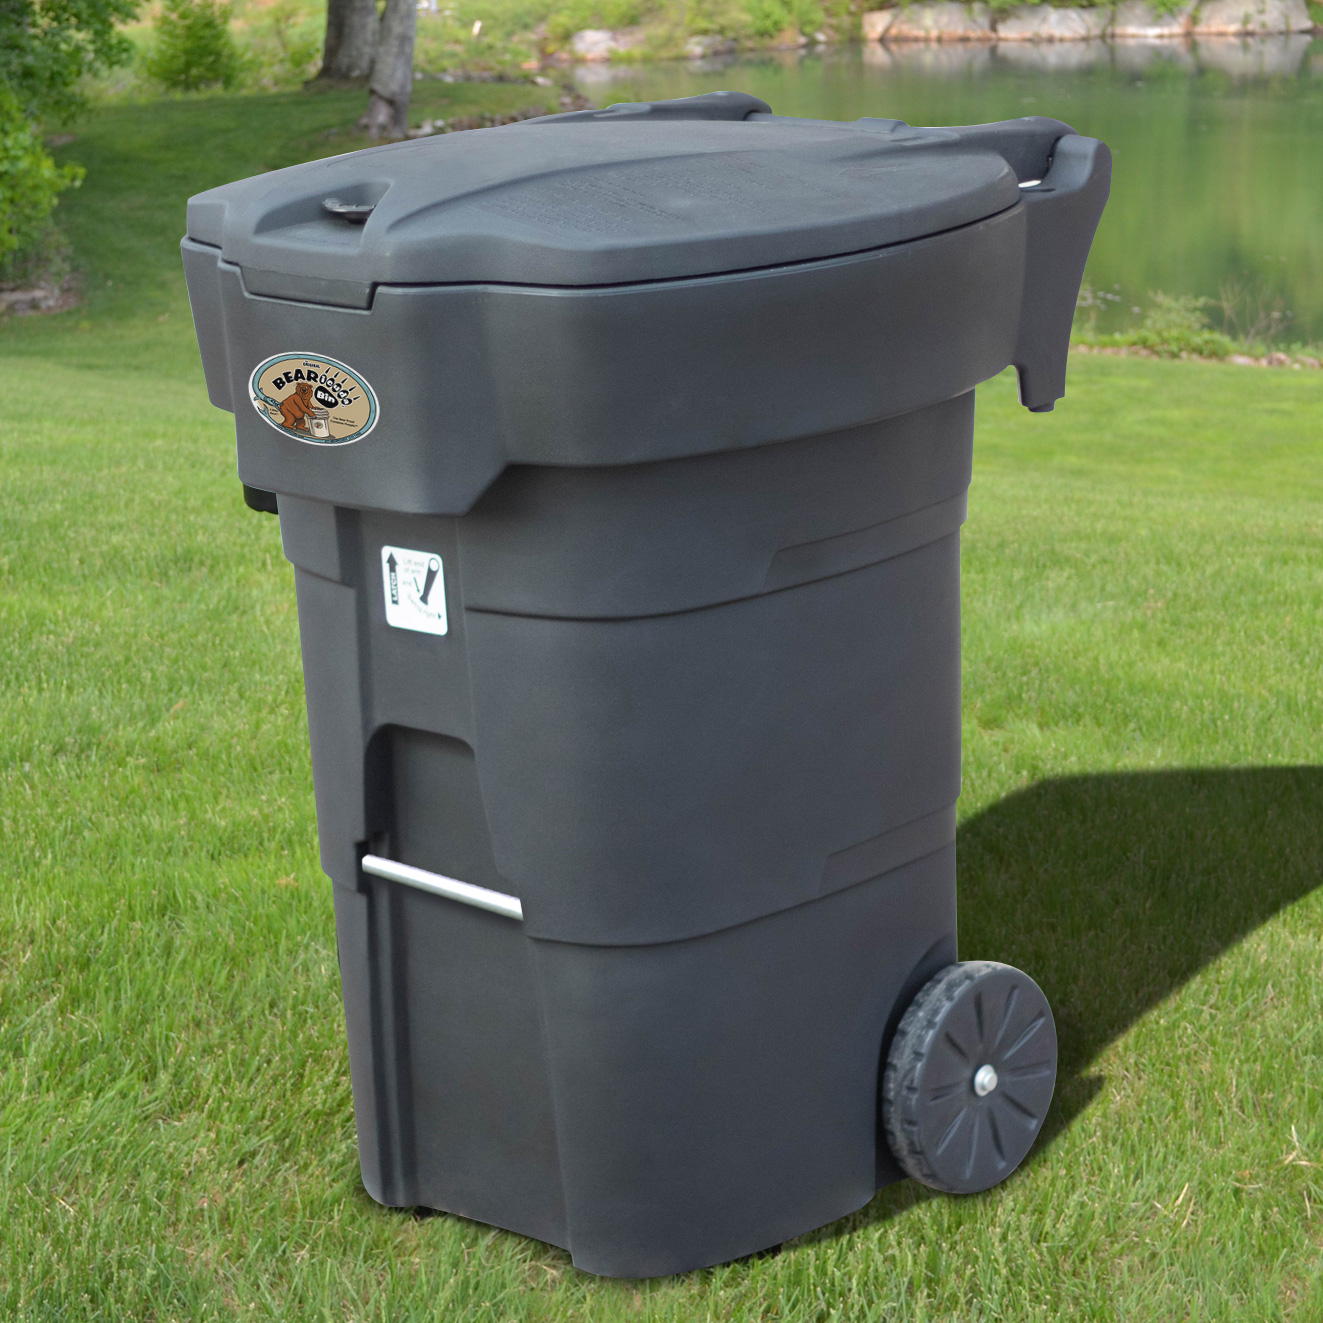 Stealth2 bearproof garbage can